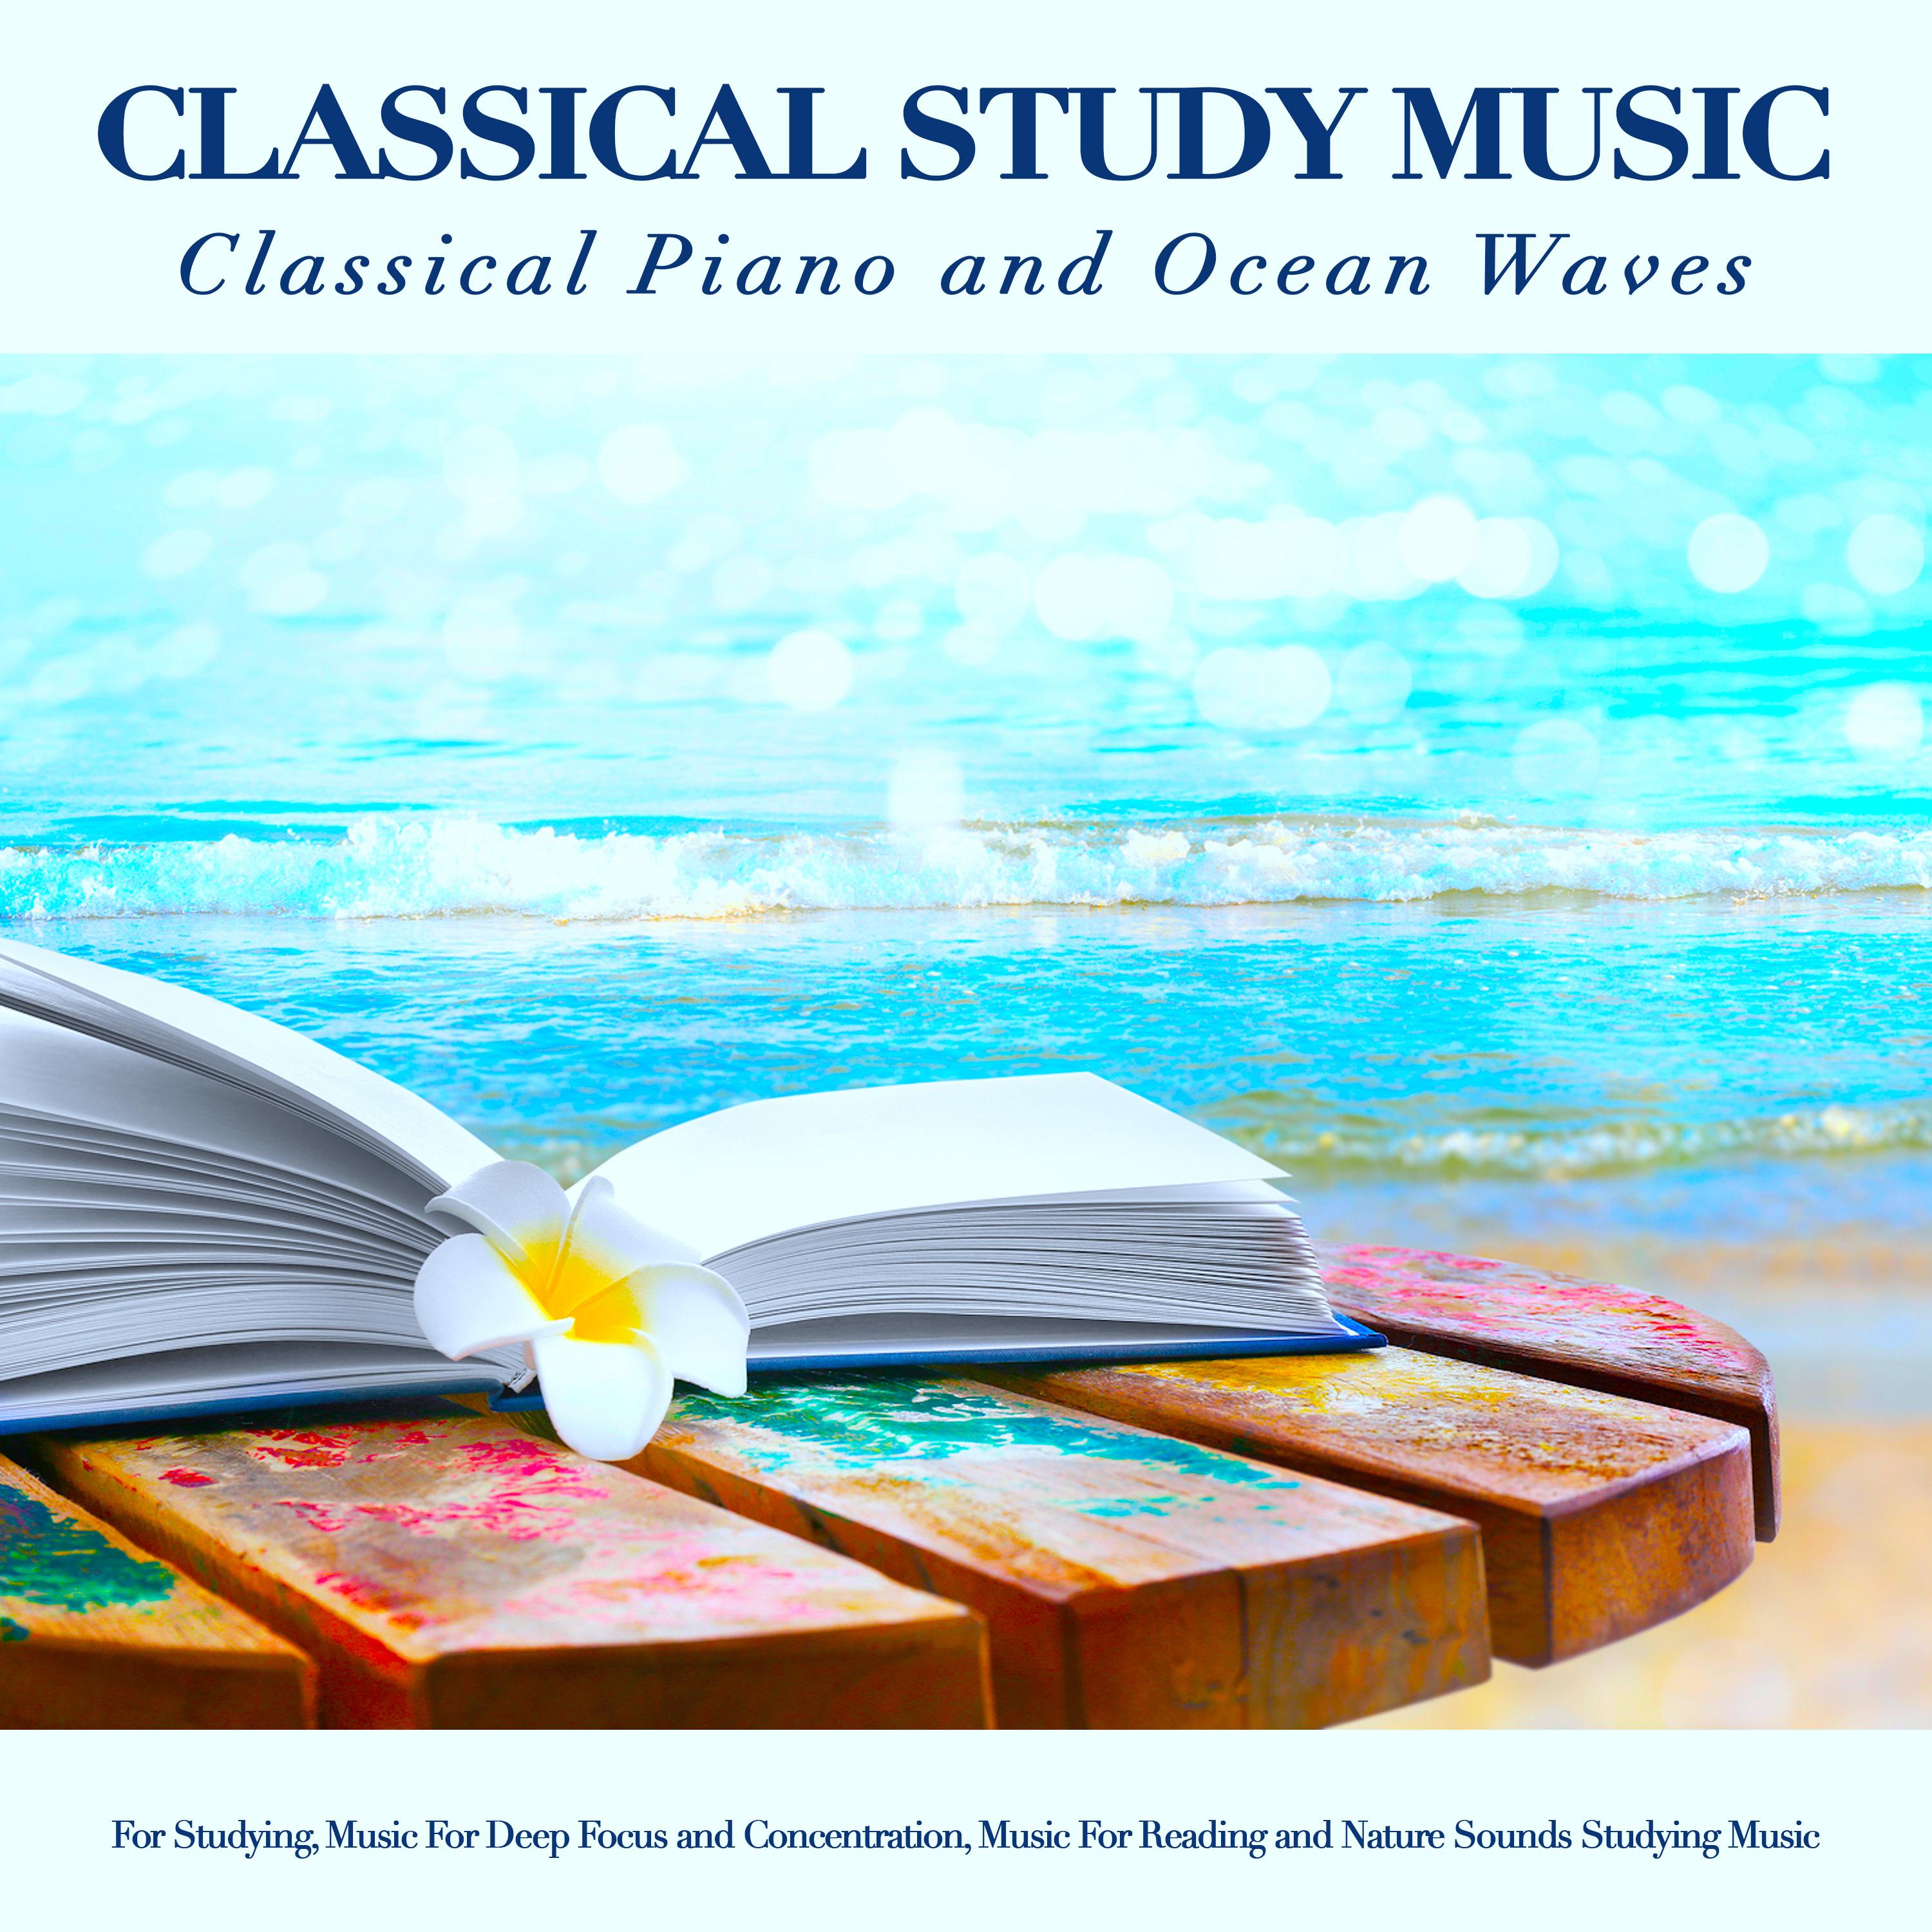 Des Abends - Schumann - Classical Study Music - Ocean Waves Sounds - Classical Piano for Studying